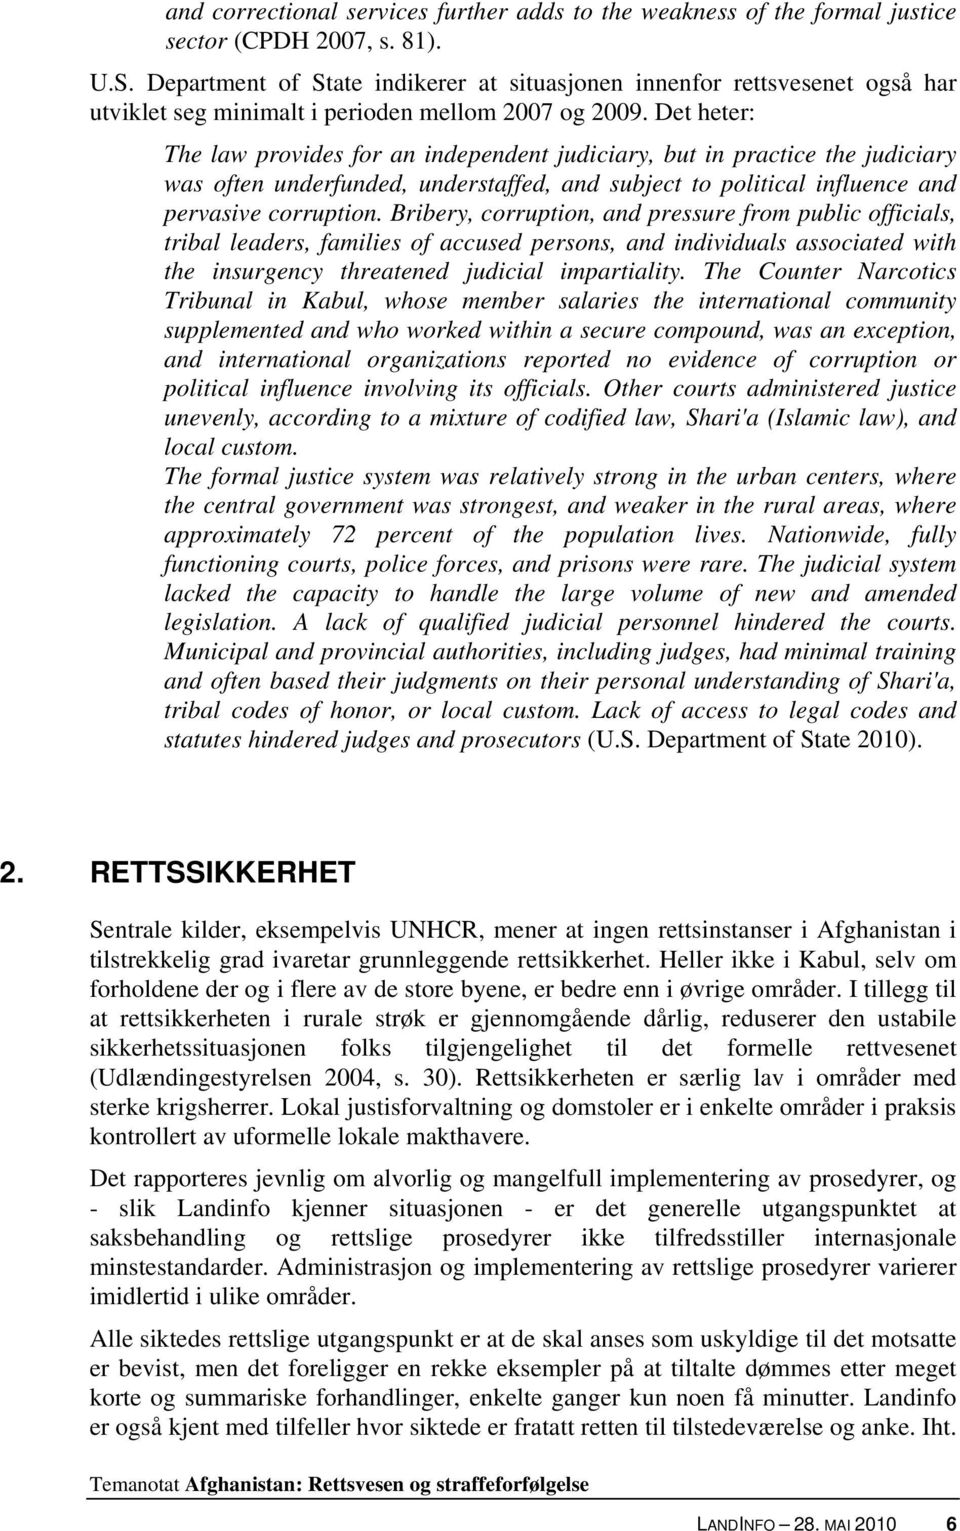 Det heter: The law provides for an independent judiciary, but in practice the judiciary was often underfunded, understaffed, and subject to political influence and pervasive corruption.